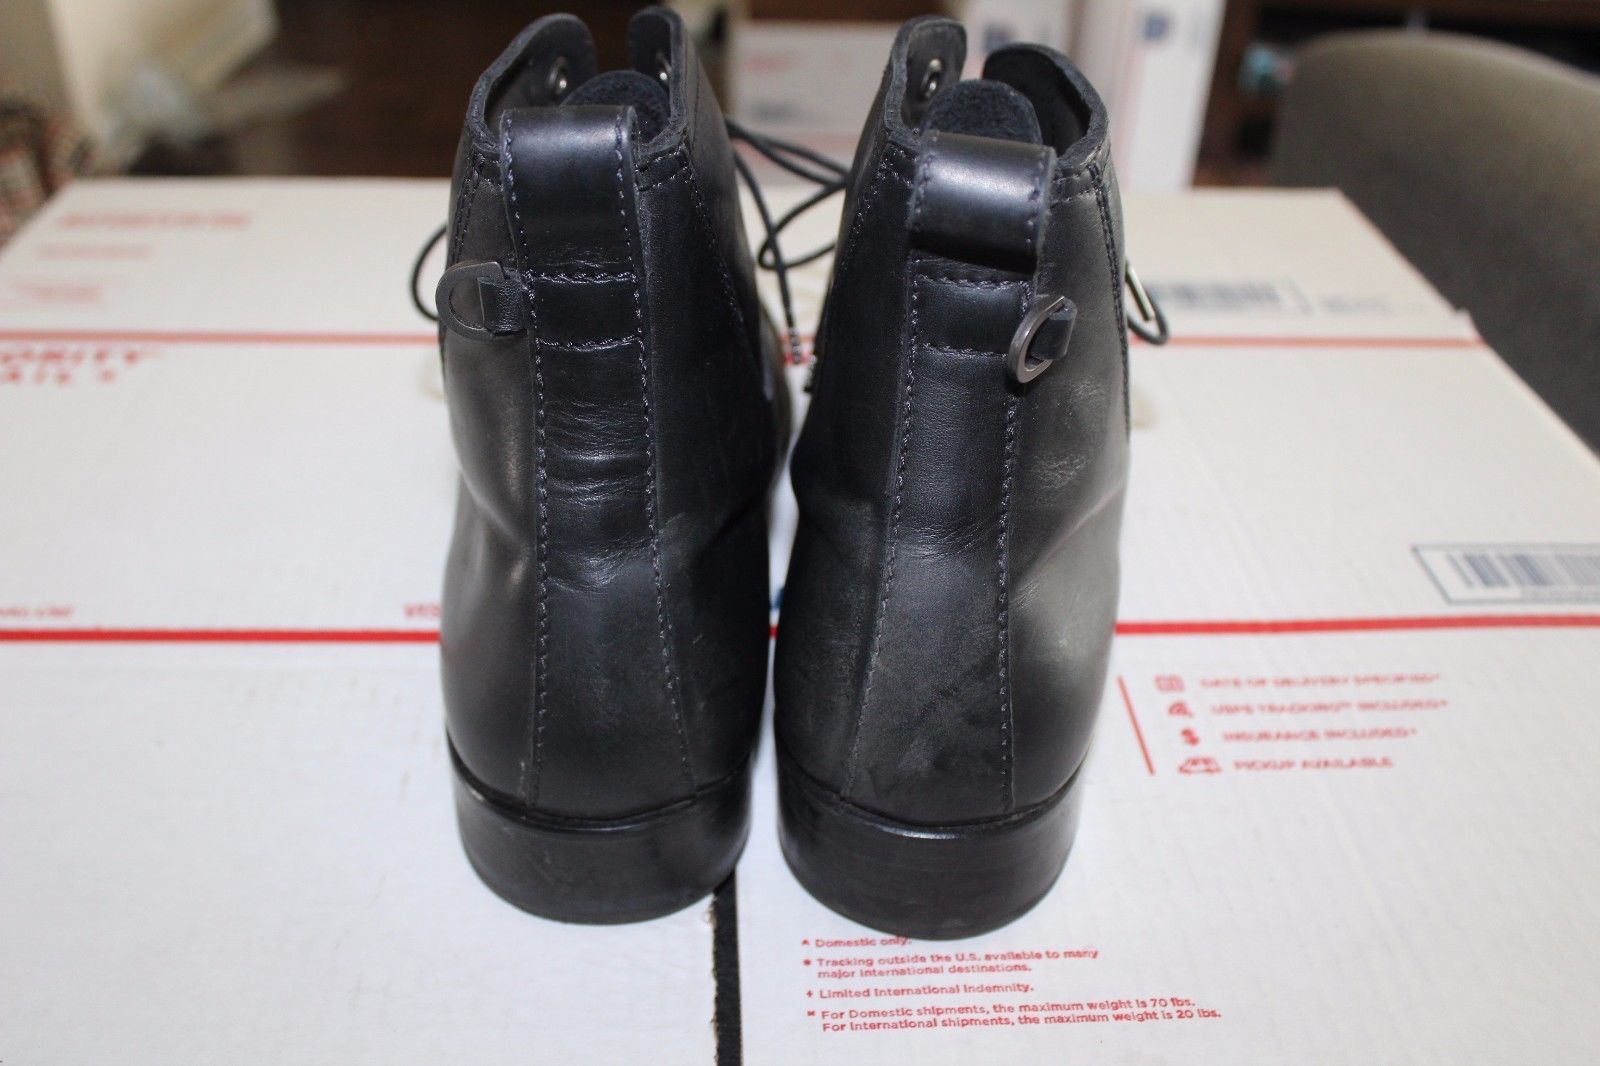 Helmut Lang HELMUT LANG ARCHIVE MADE IN INTALY COMBAT BOOT BLACK LEATHER SIZE 41 EU / 8 US Size US 8 / EU 41 - 2 Preview